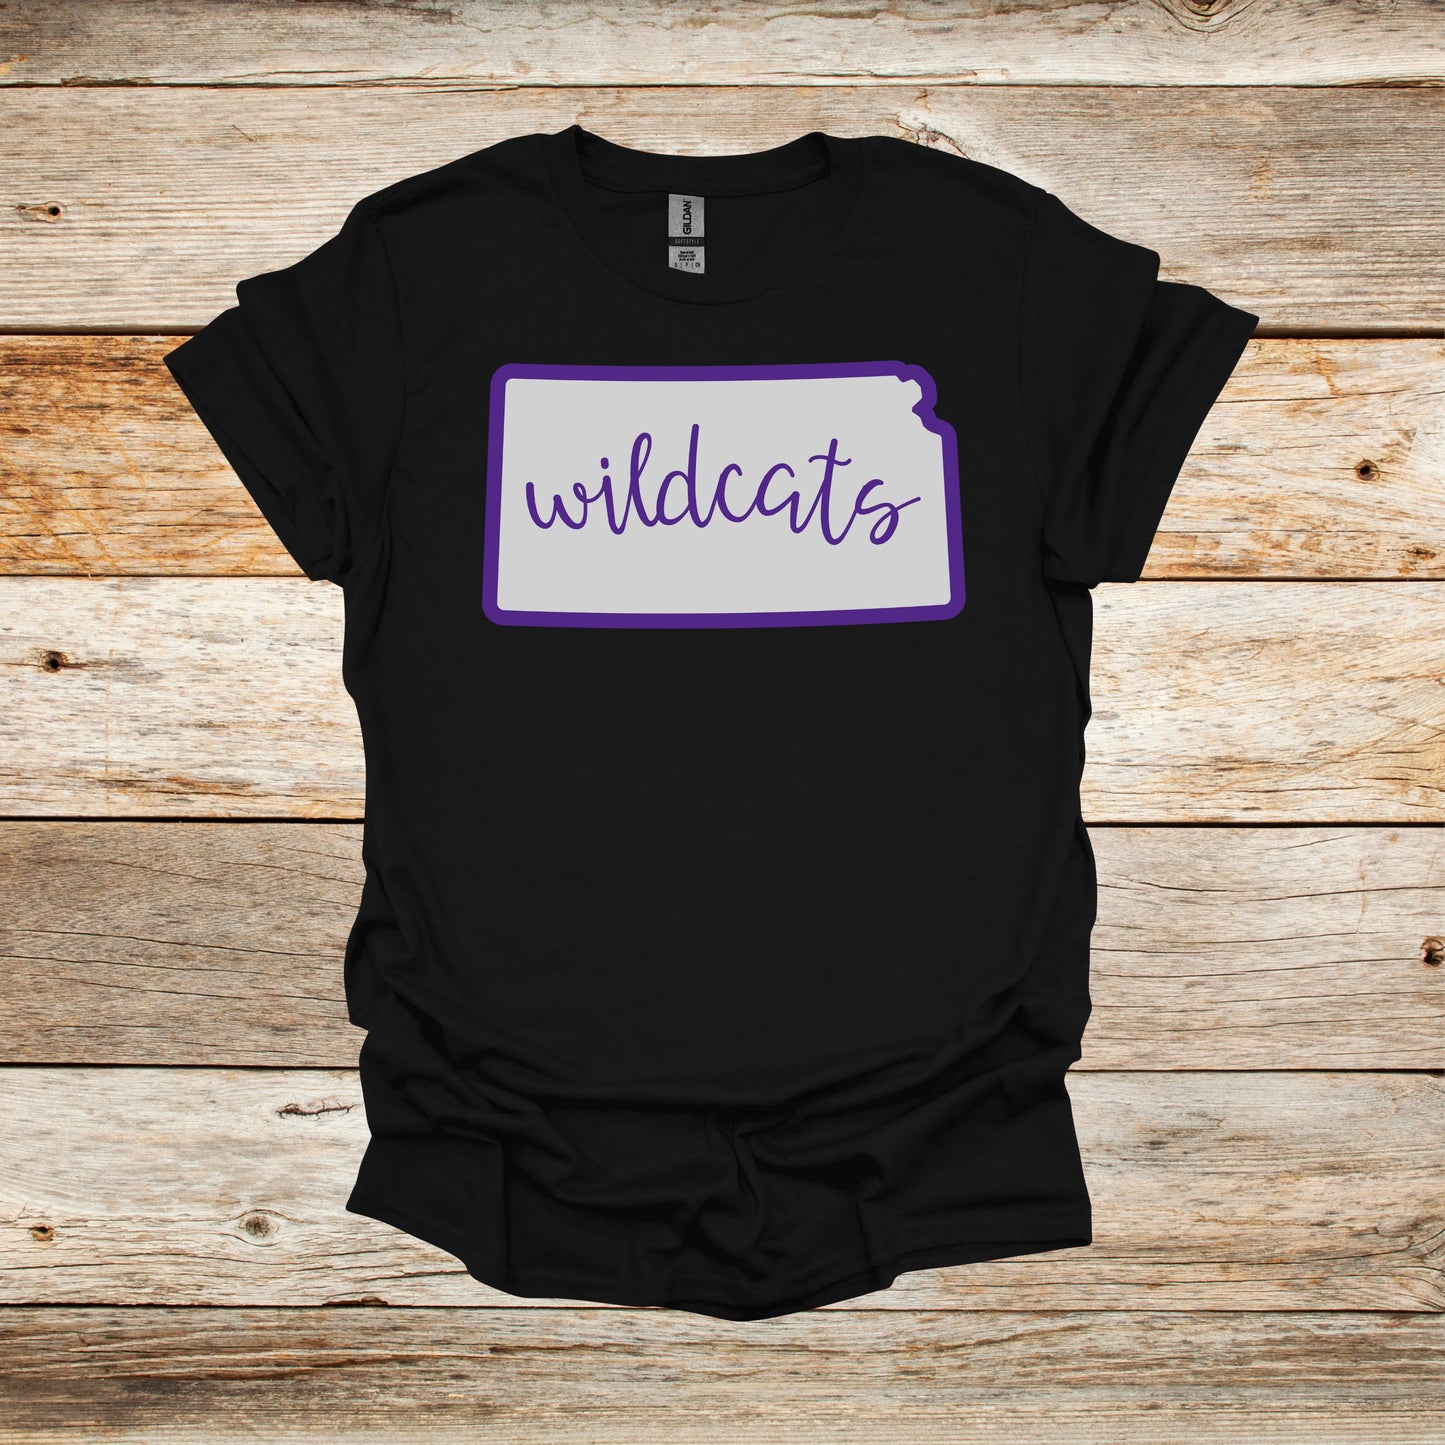 College T Shirt - Kansas State Wildcats - State Outline - Adult and Children's Tee Shirts T-Shirts Graphic Avenue Black Adult Small 